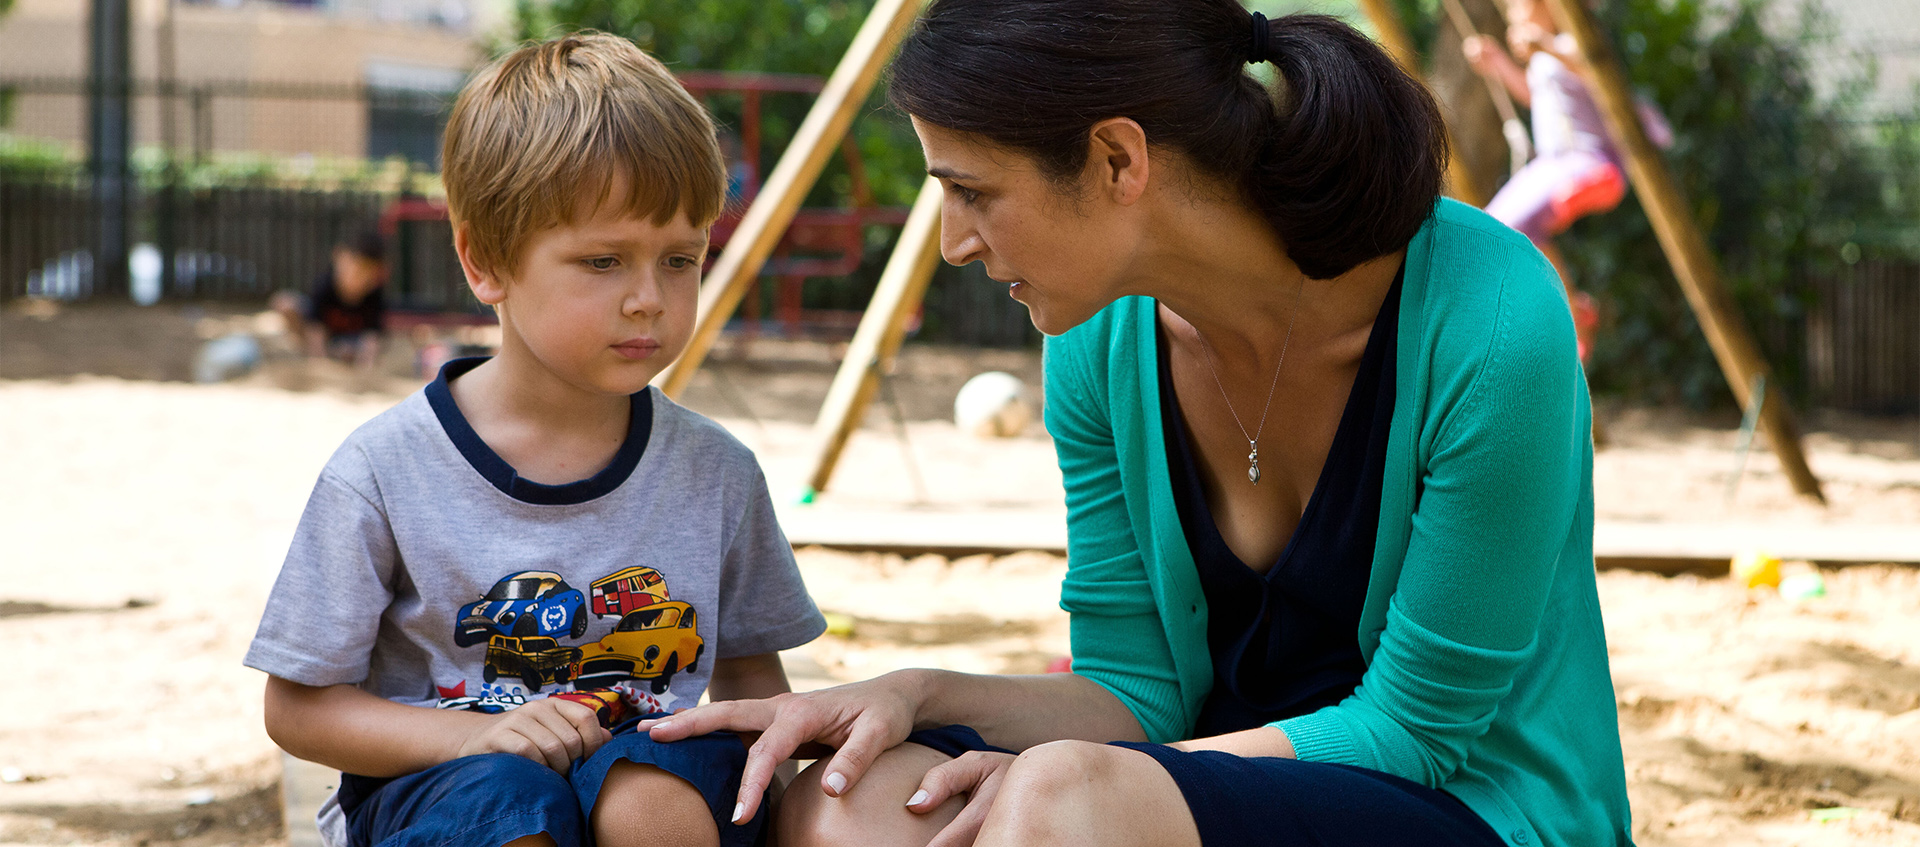 A young boy and a woman sitting and talking in a playground.